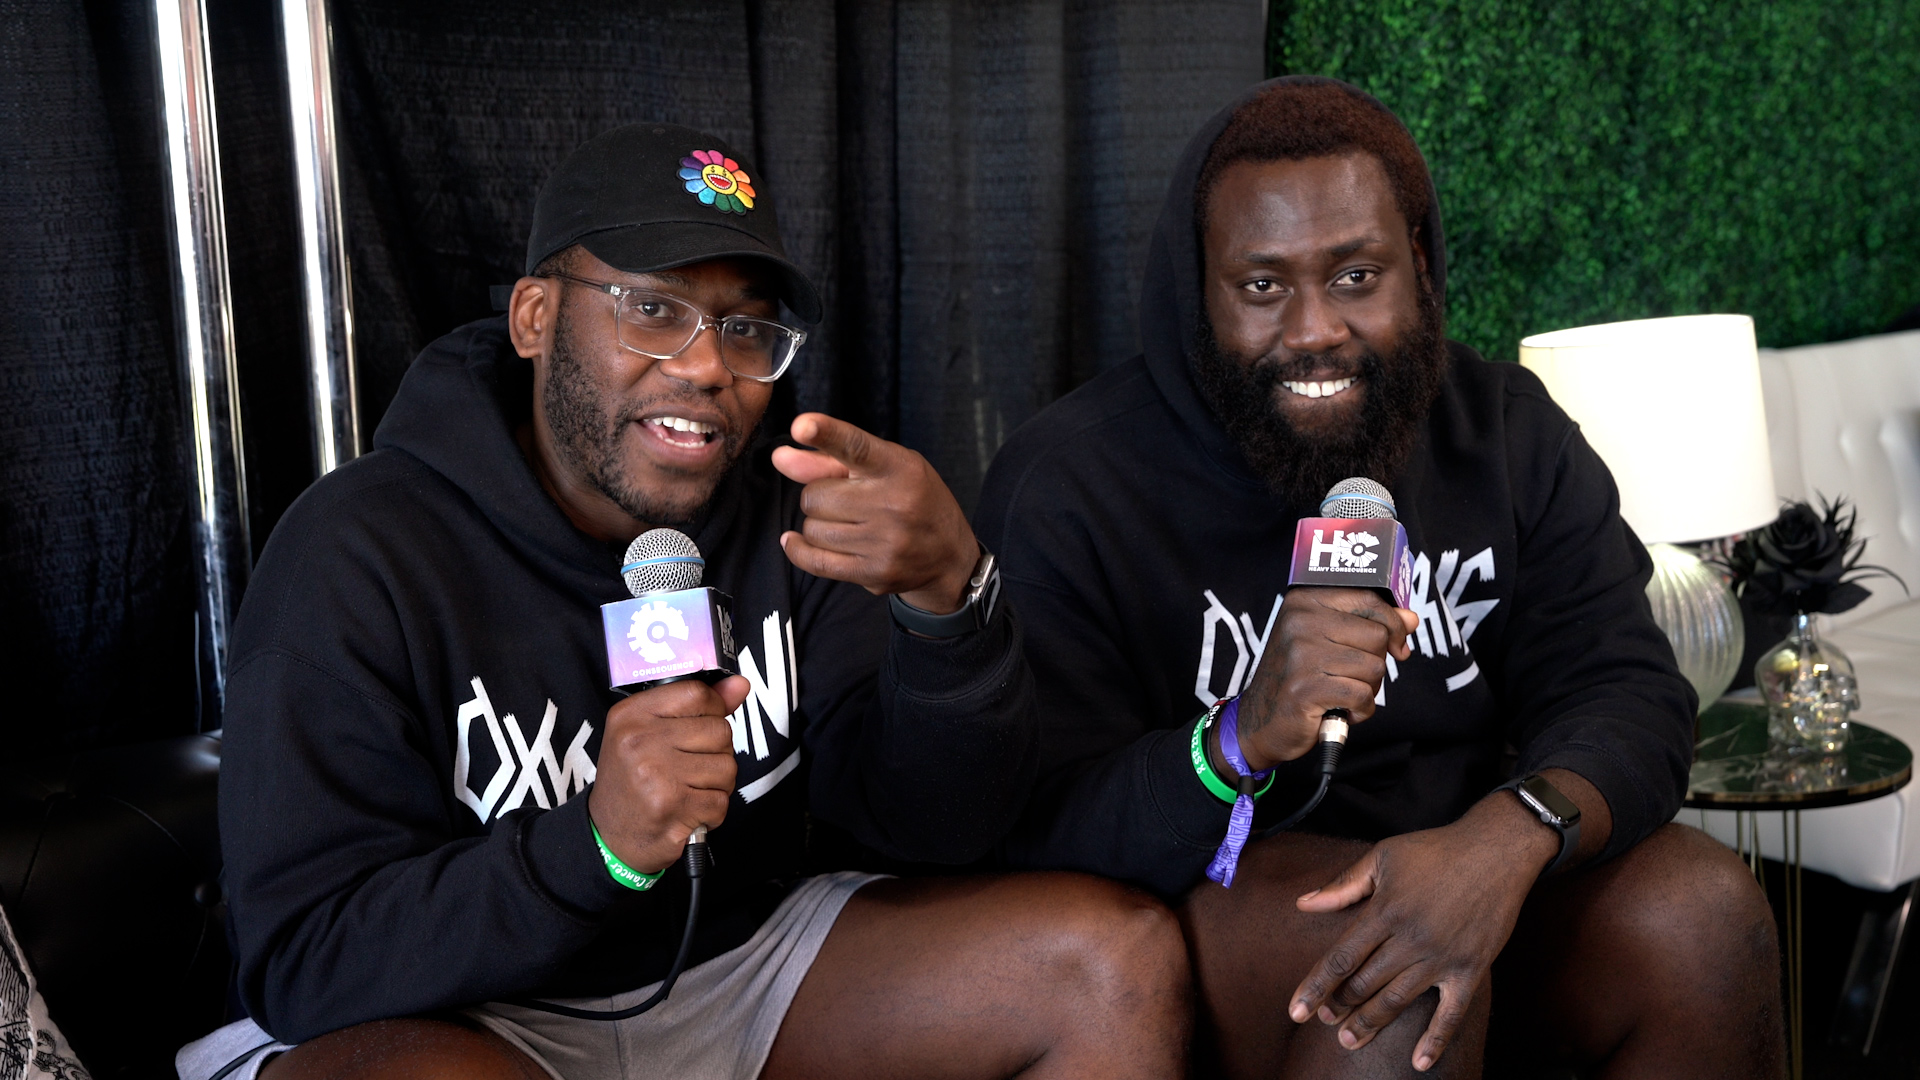 Oxymorrons on How Their Influences Range from Jay-Z to Metallica